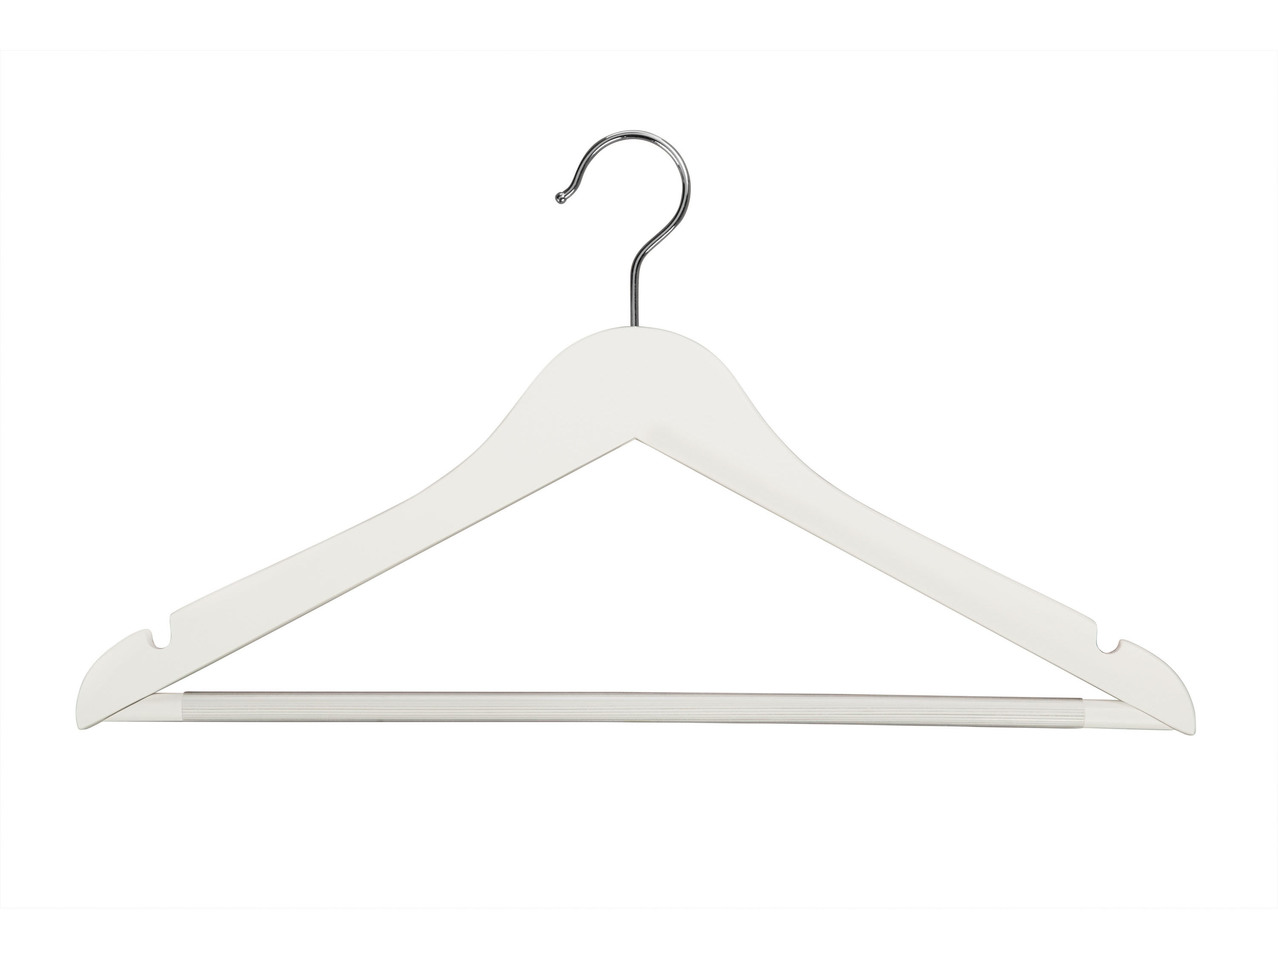 Clothes Hangers 1 or 3 pieces